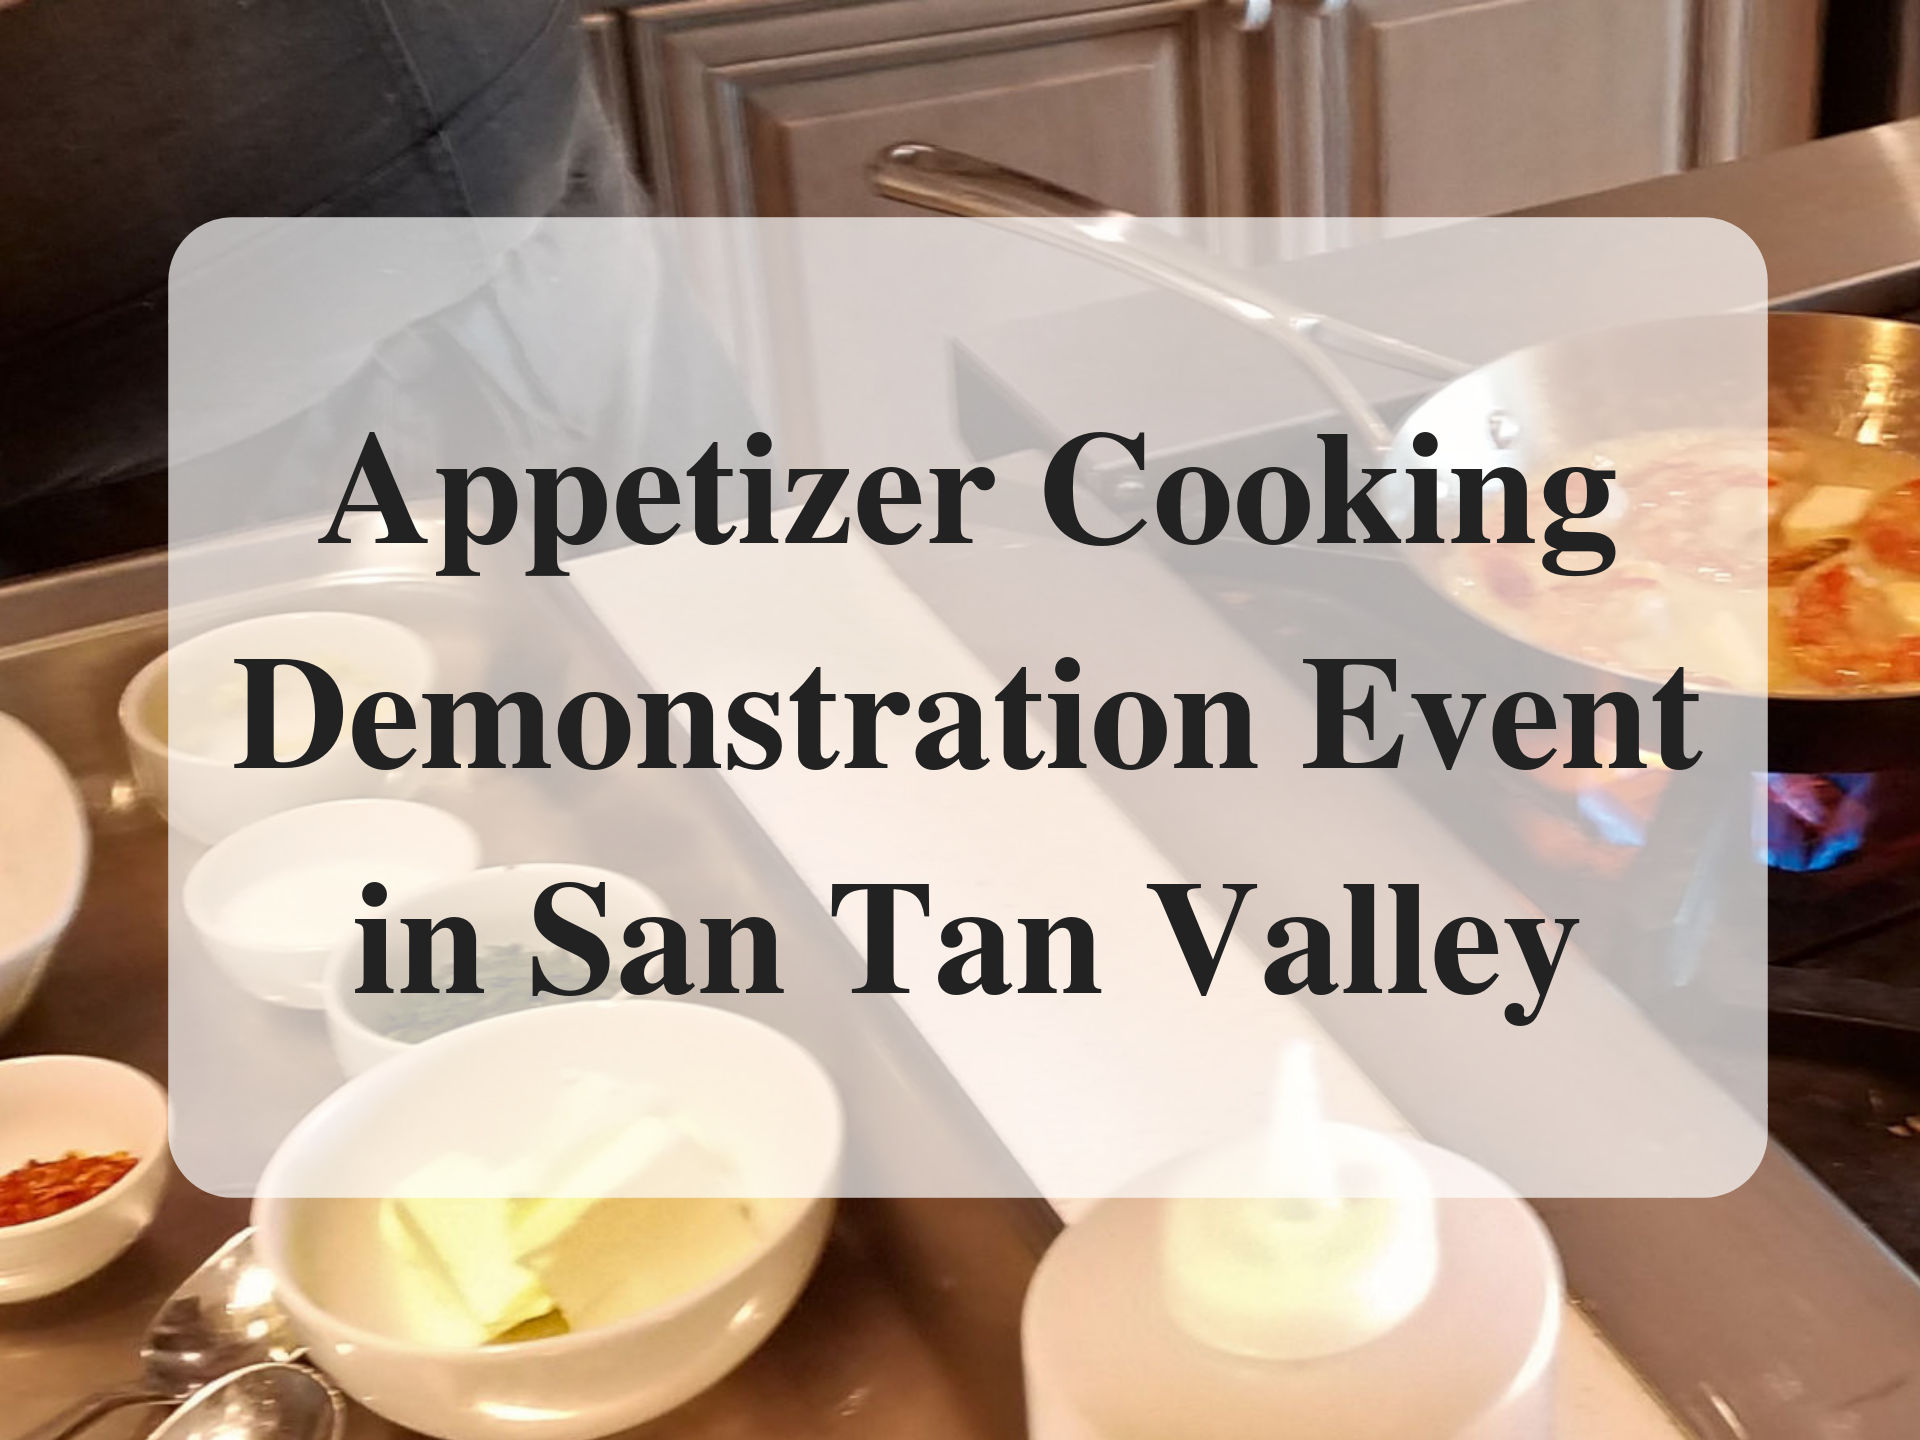 Appetizer Cooking Demonstration Event in San Tan Valley